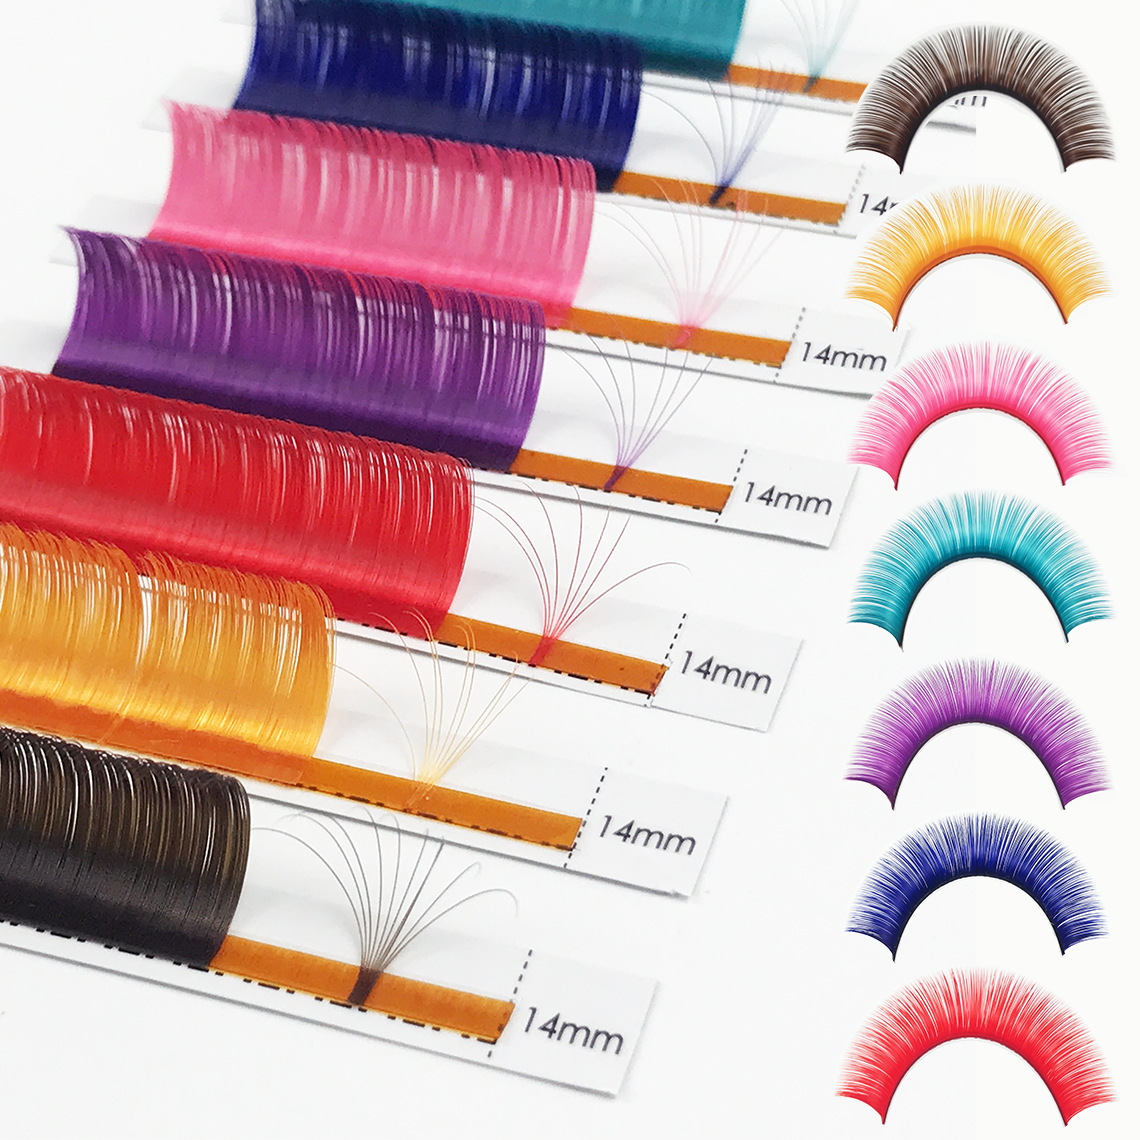 Colored Lashes Extensions Brown Light Violet Pink Blue Red | CoMango